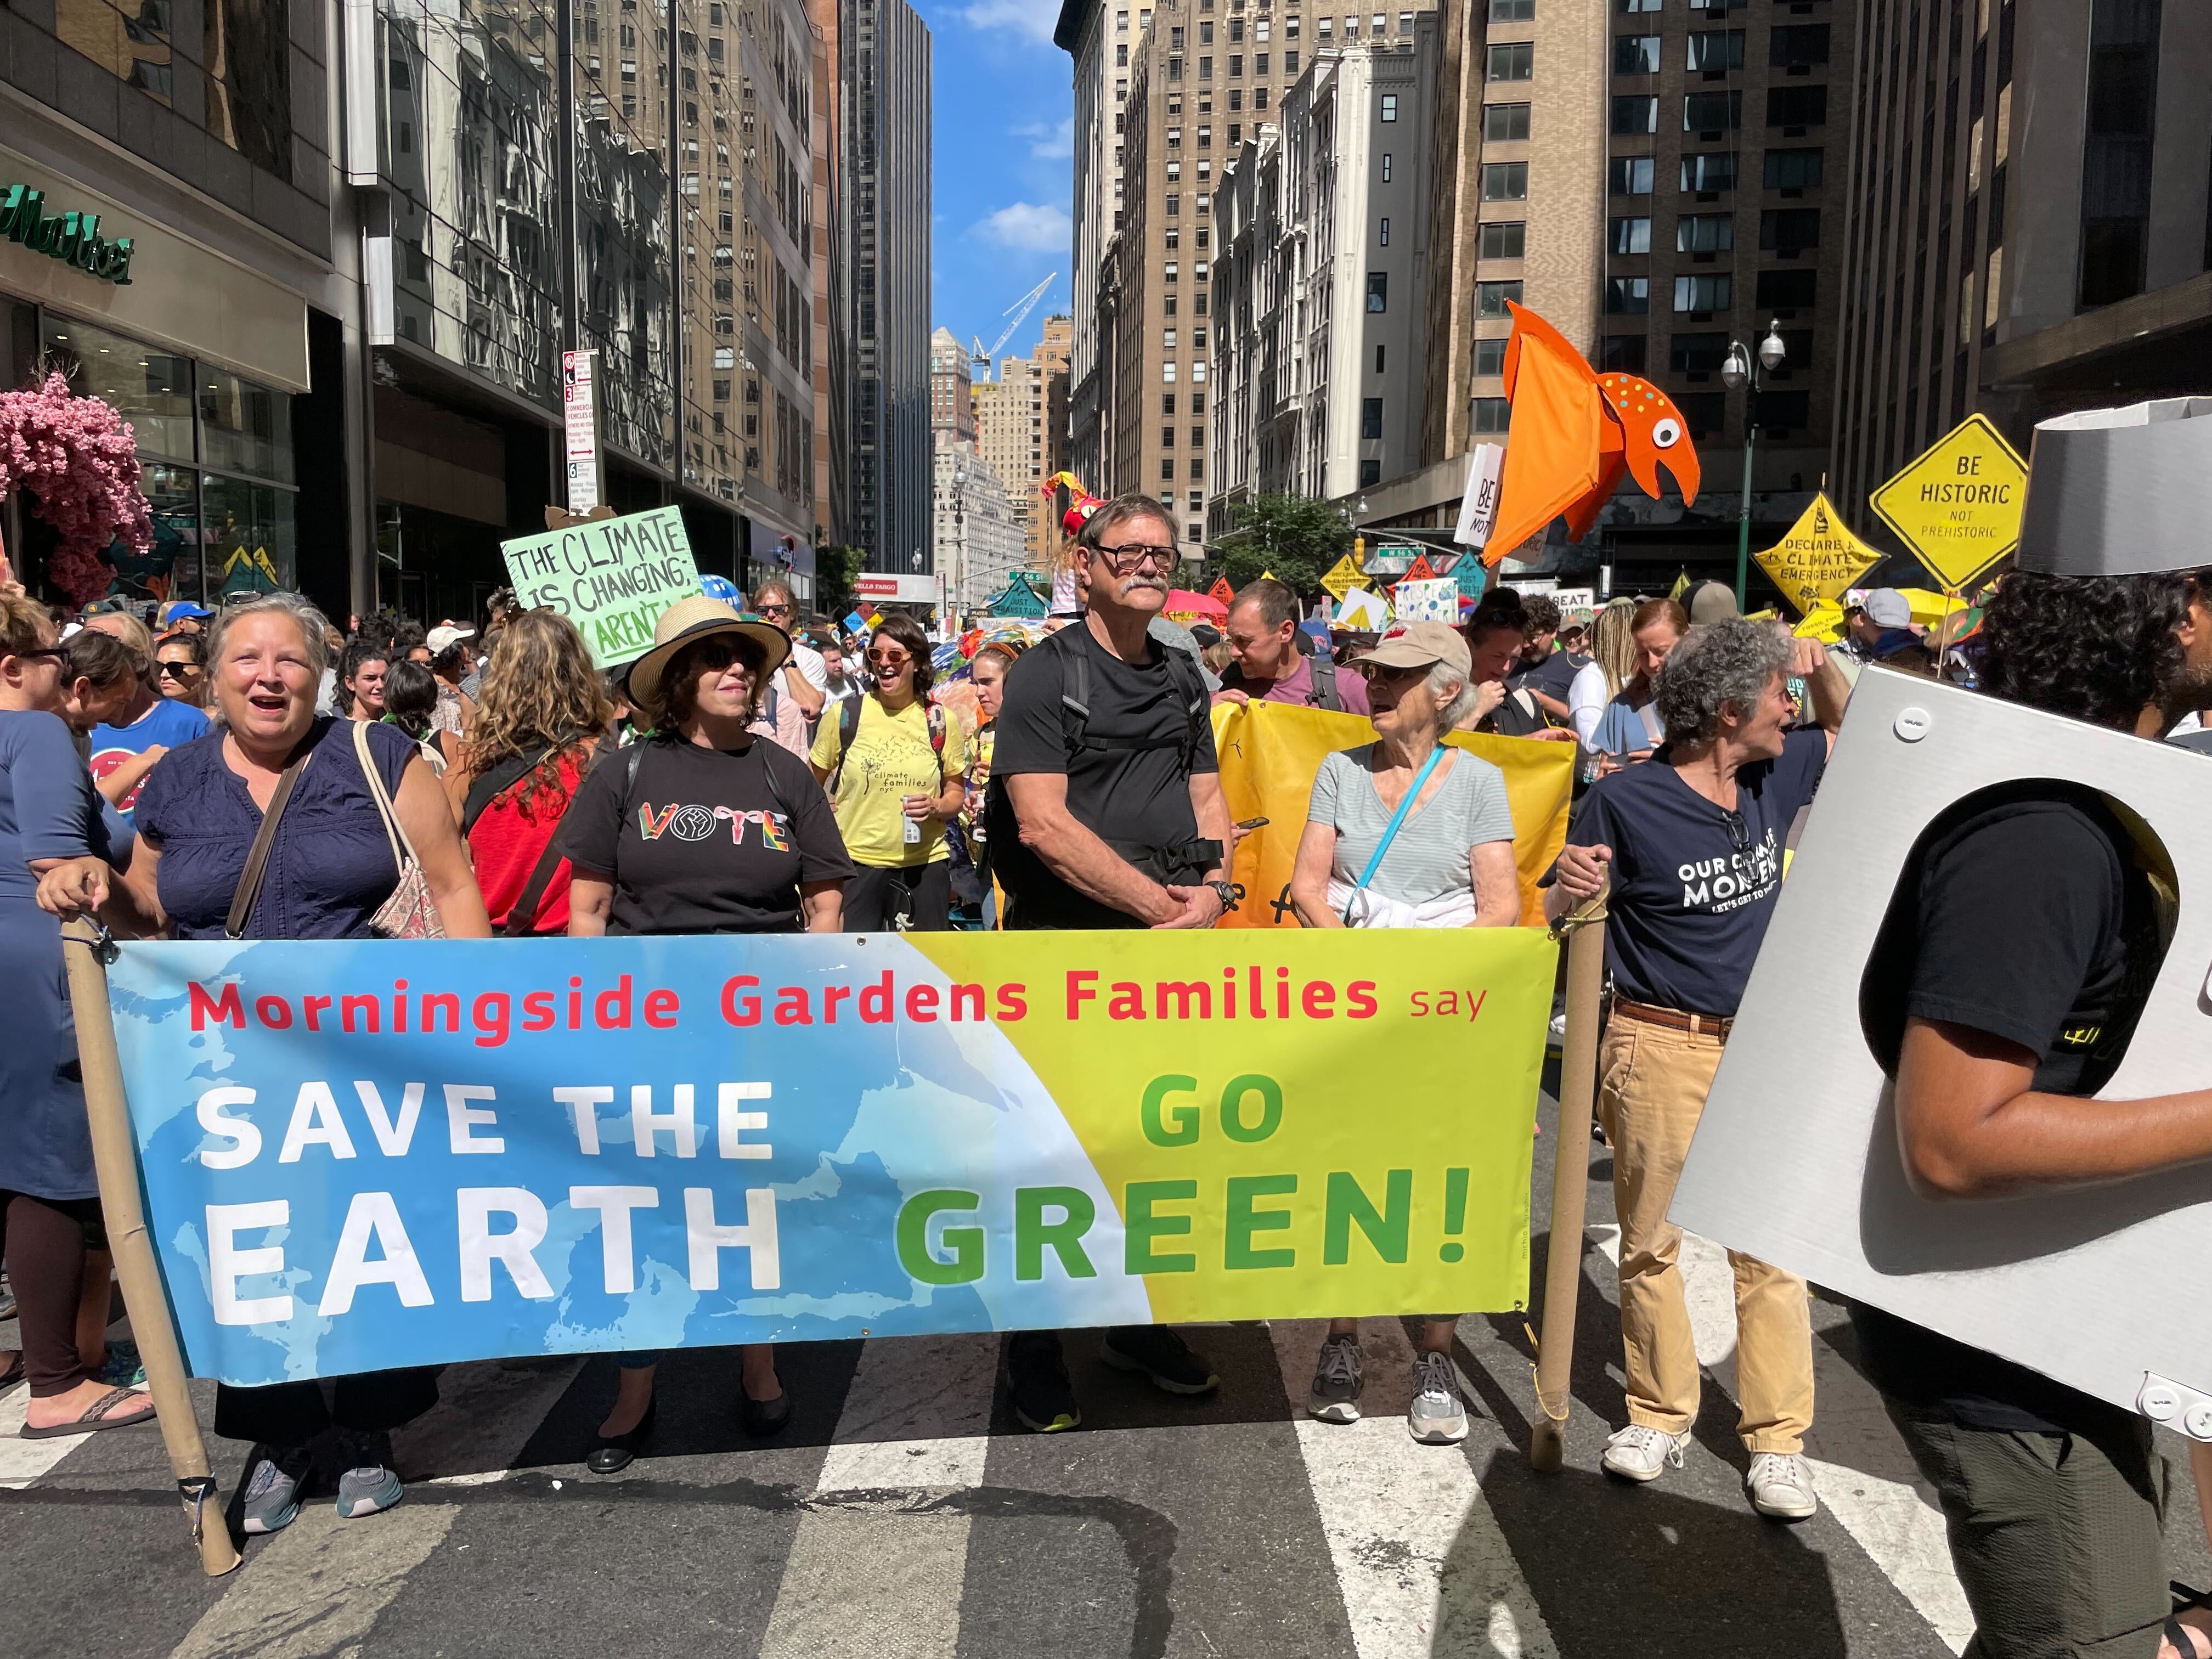 Sunday's march is called the "March to End Fossil Fuels" primarily calling on President Joe Biden to divest from oil pipeline projects and fossil fuels as a whole.